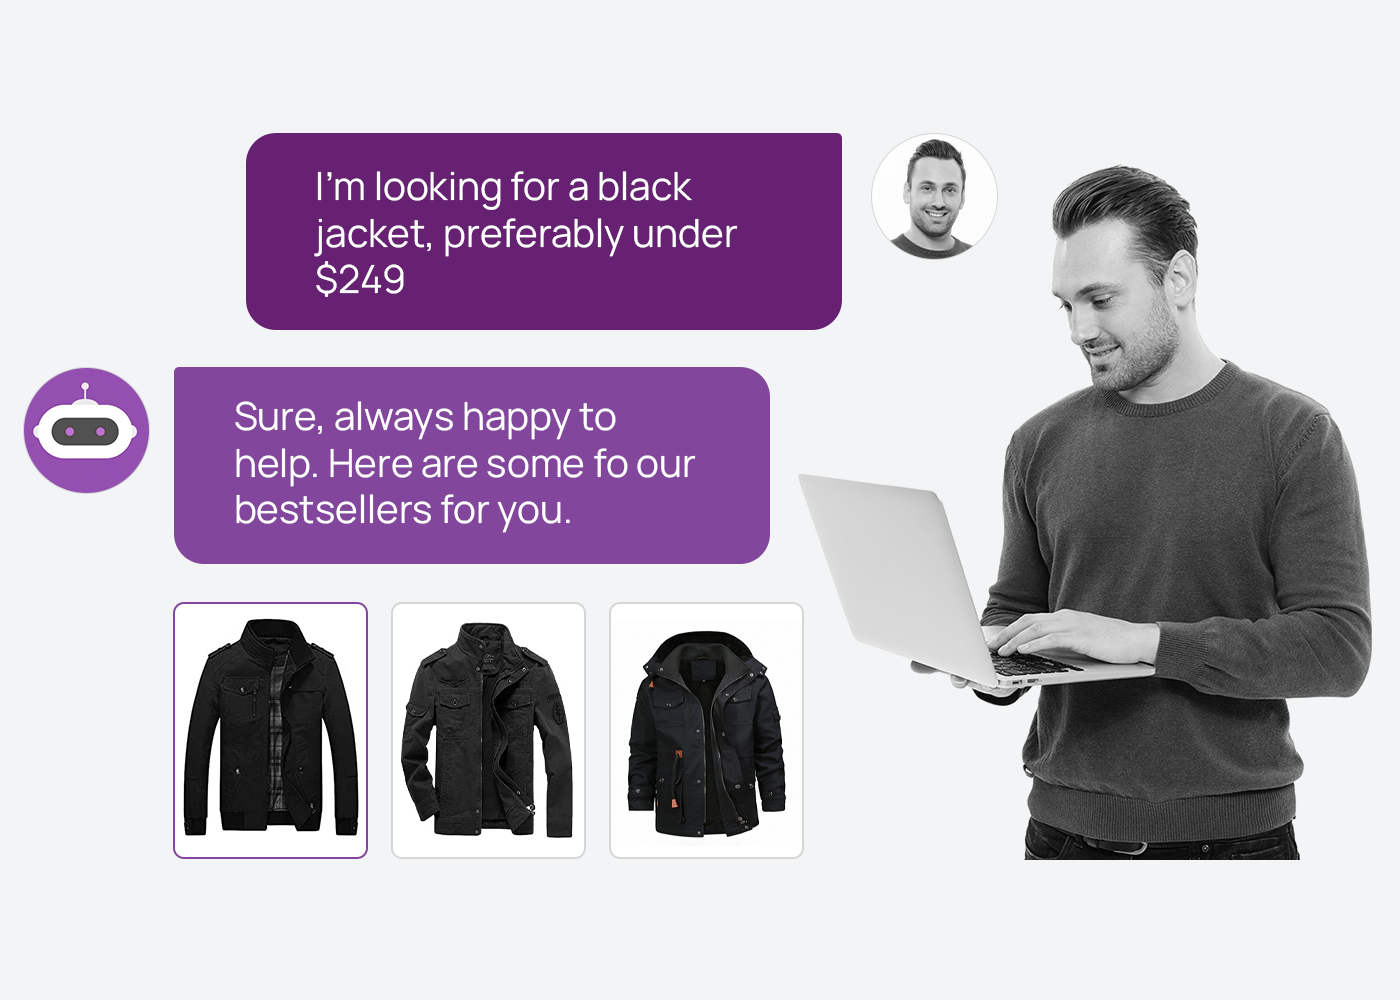 Conversational AI helping a man search for a black jacket on his laptop.